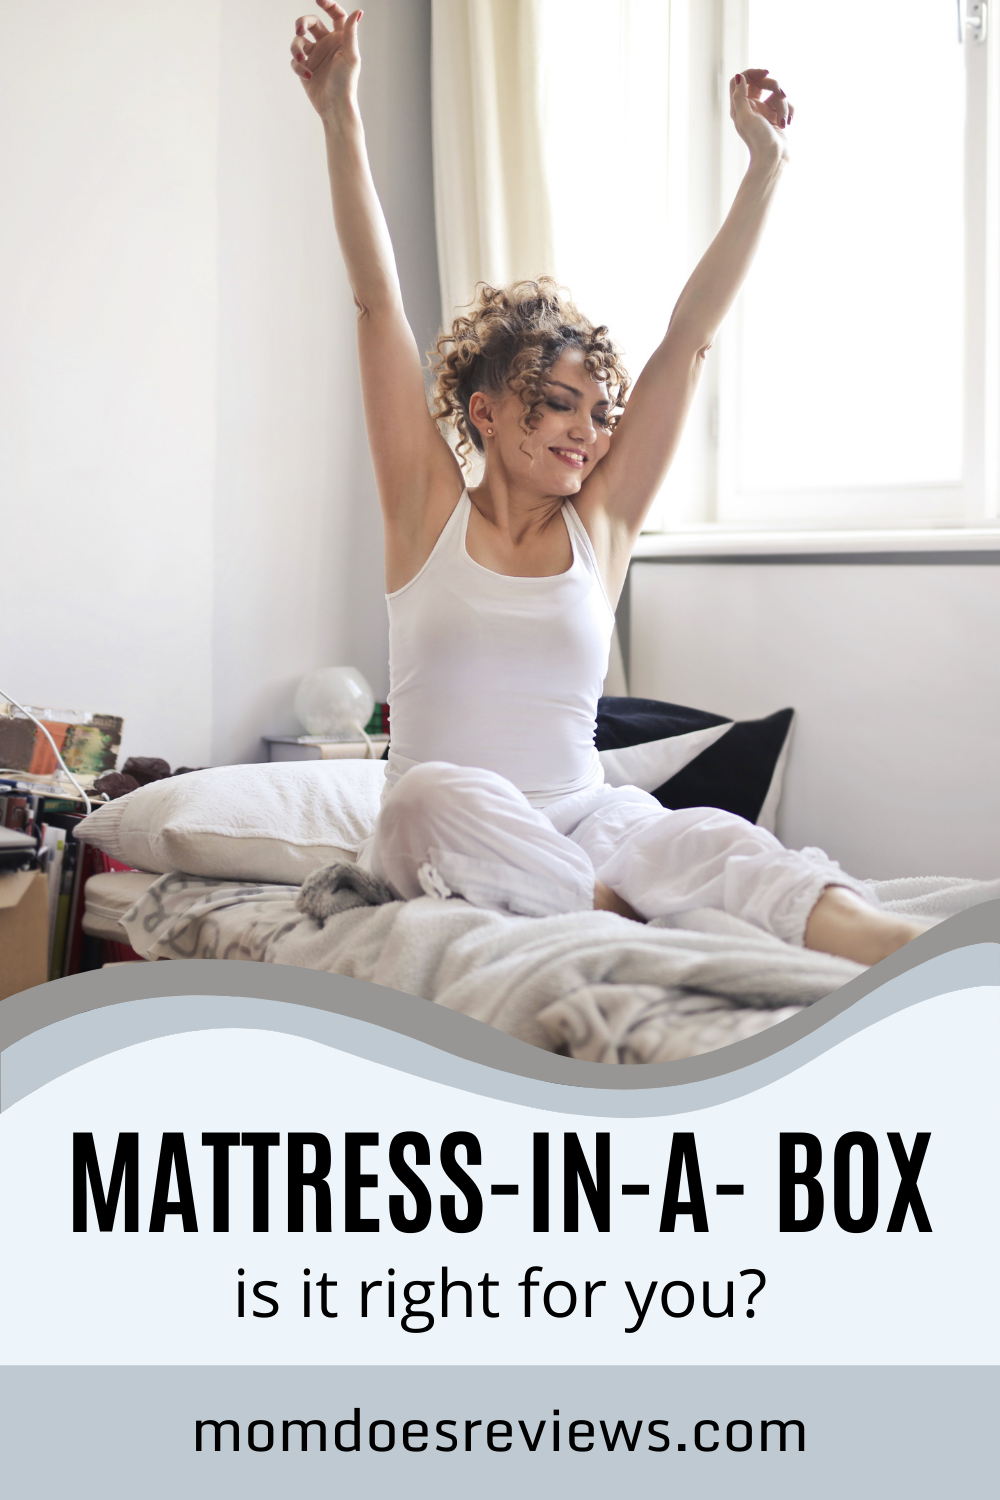 How To Tell If a Mattress-In-A-Box Is the Right Choice For You